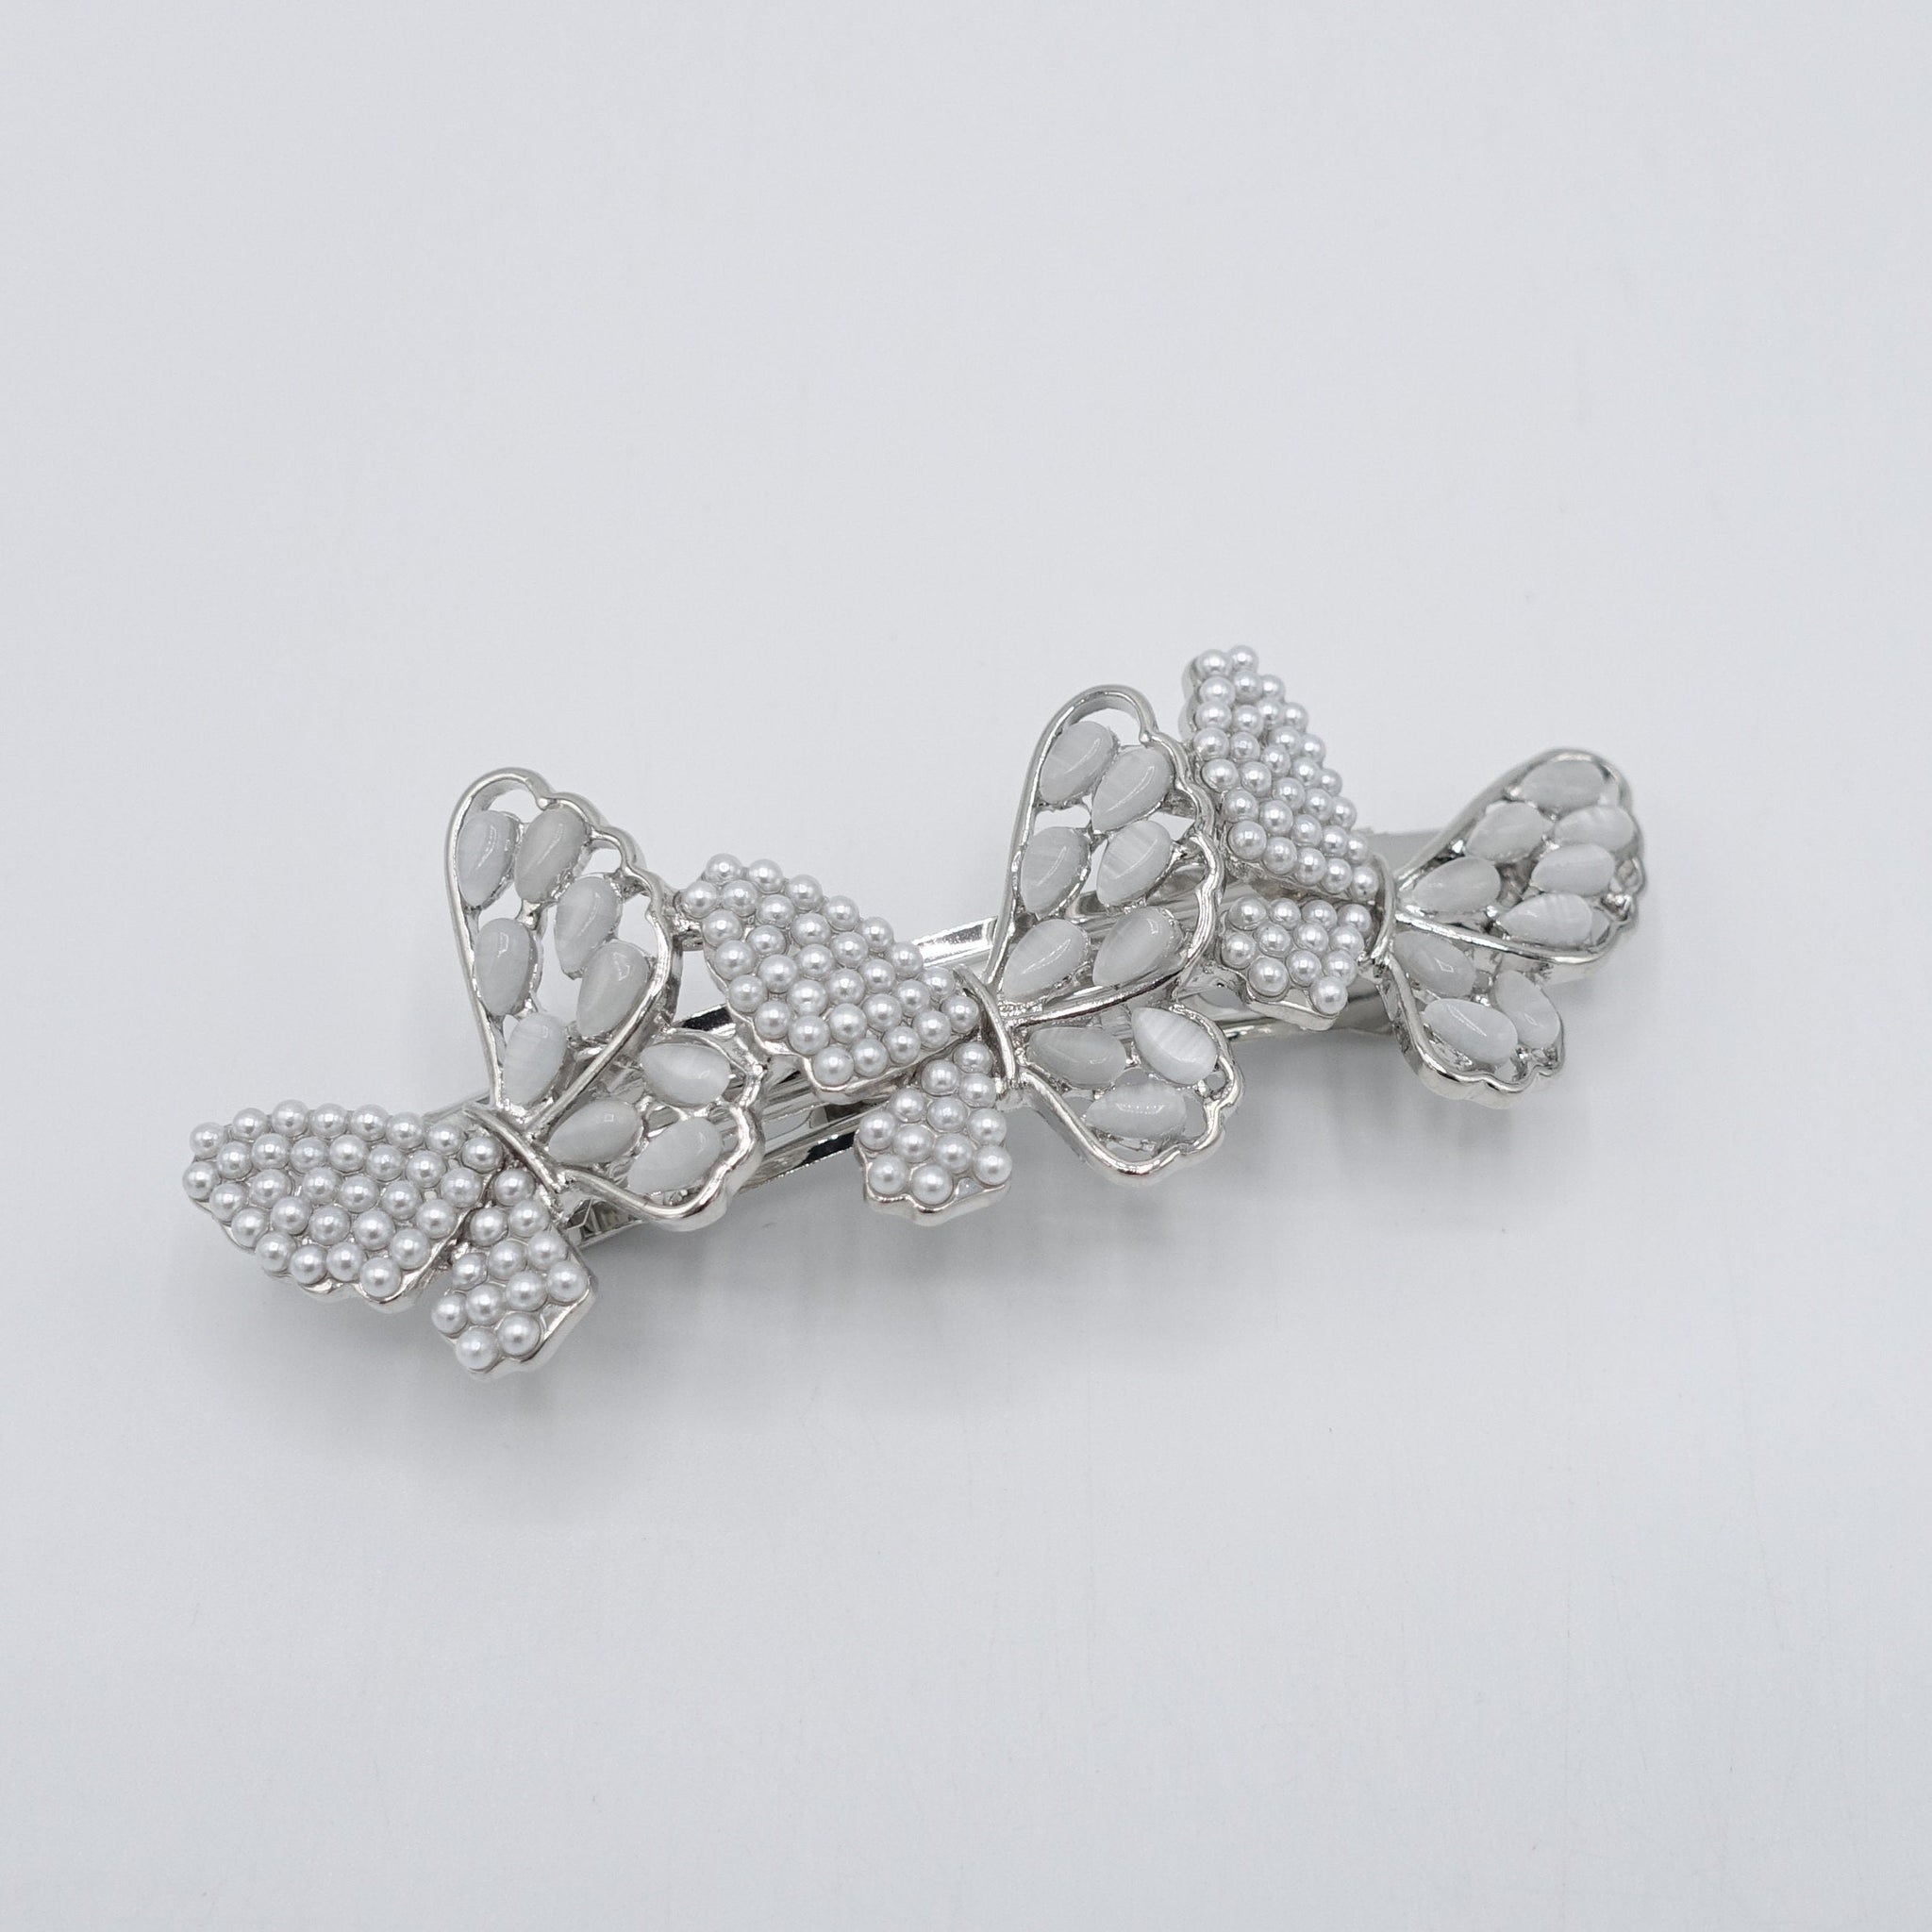 VeryShine butterfly hair barrette pearl catseye embellished hair accessory for women